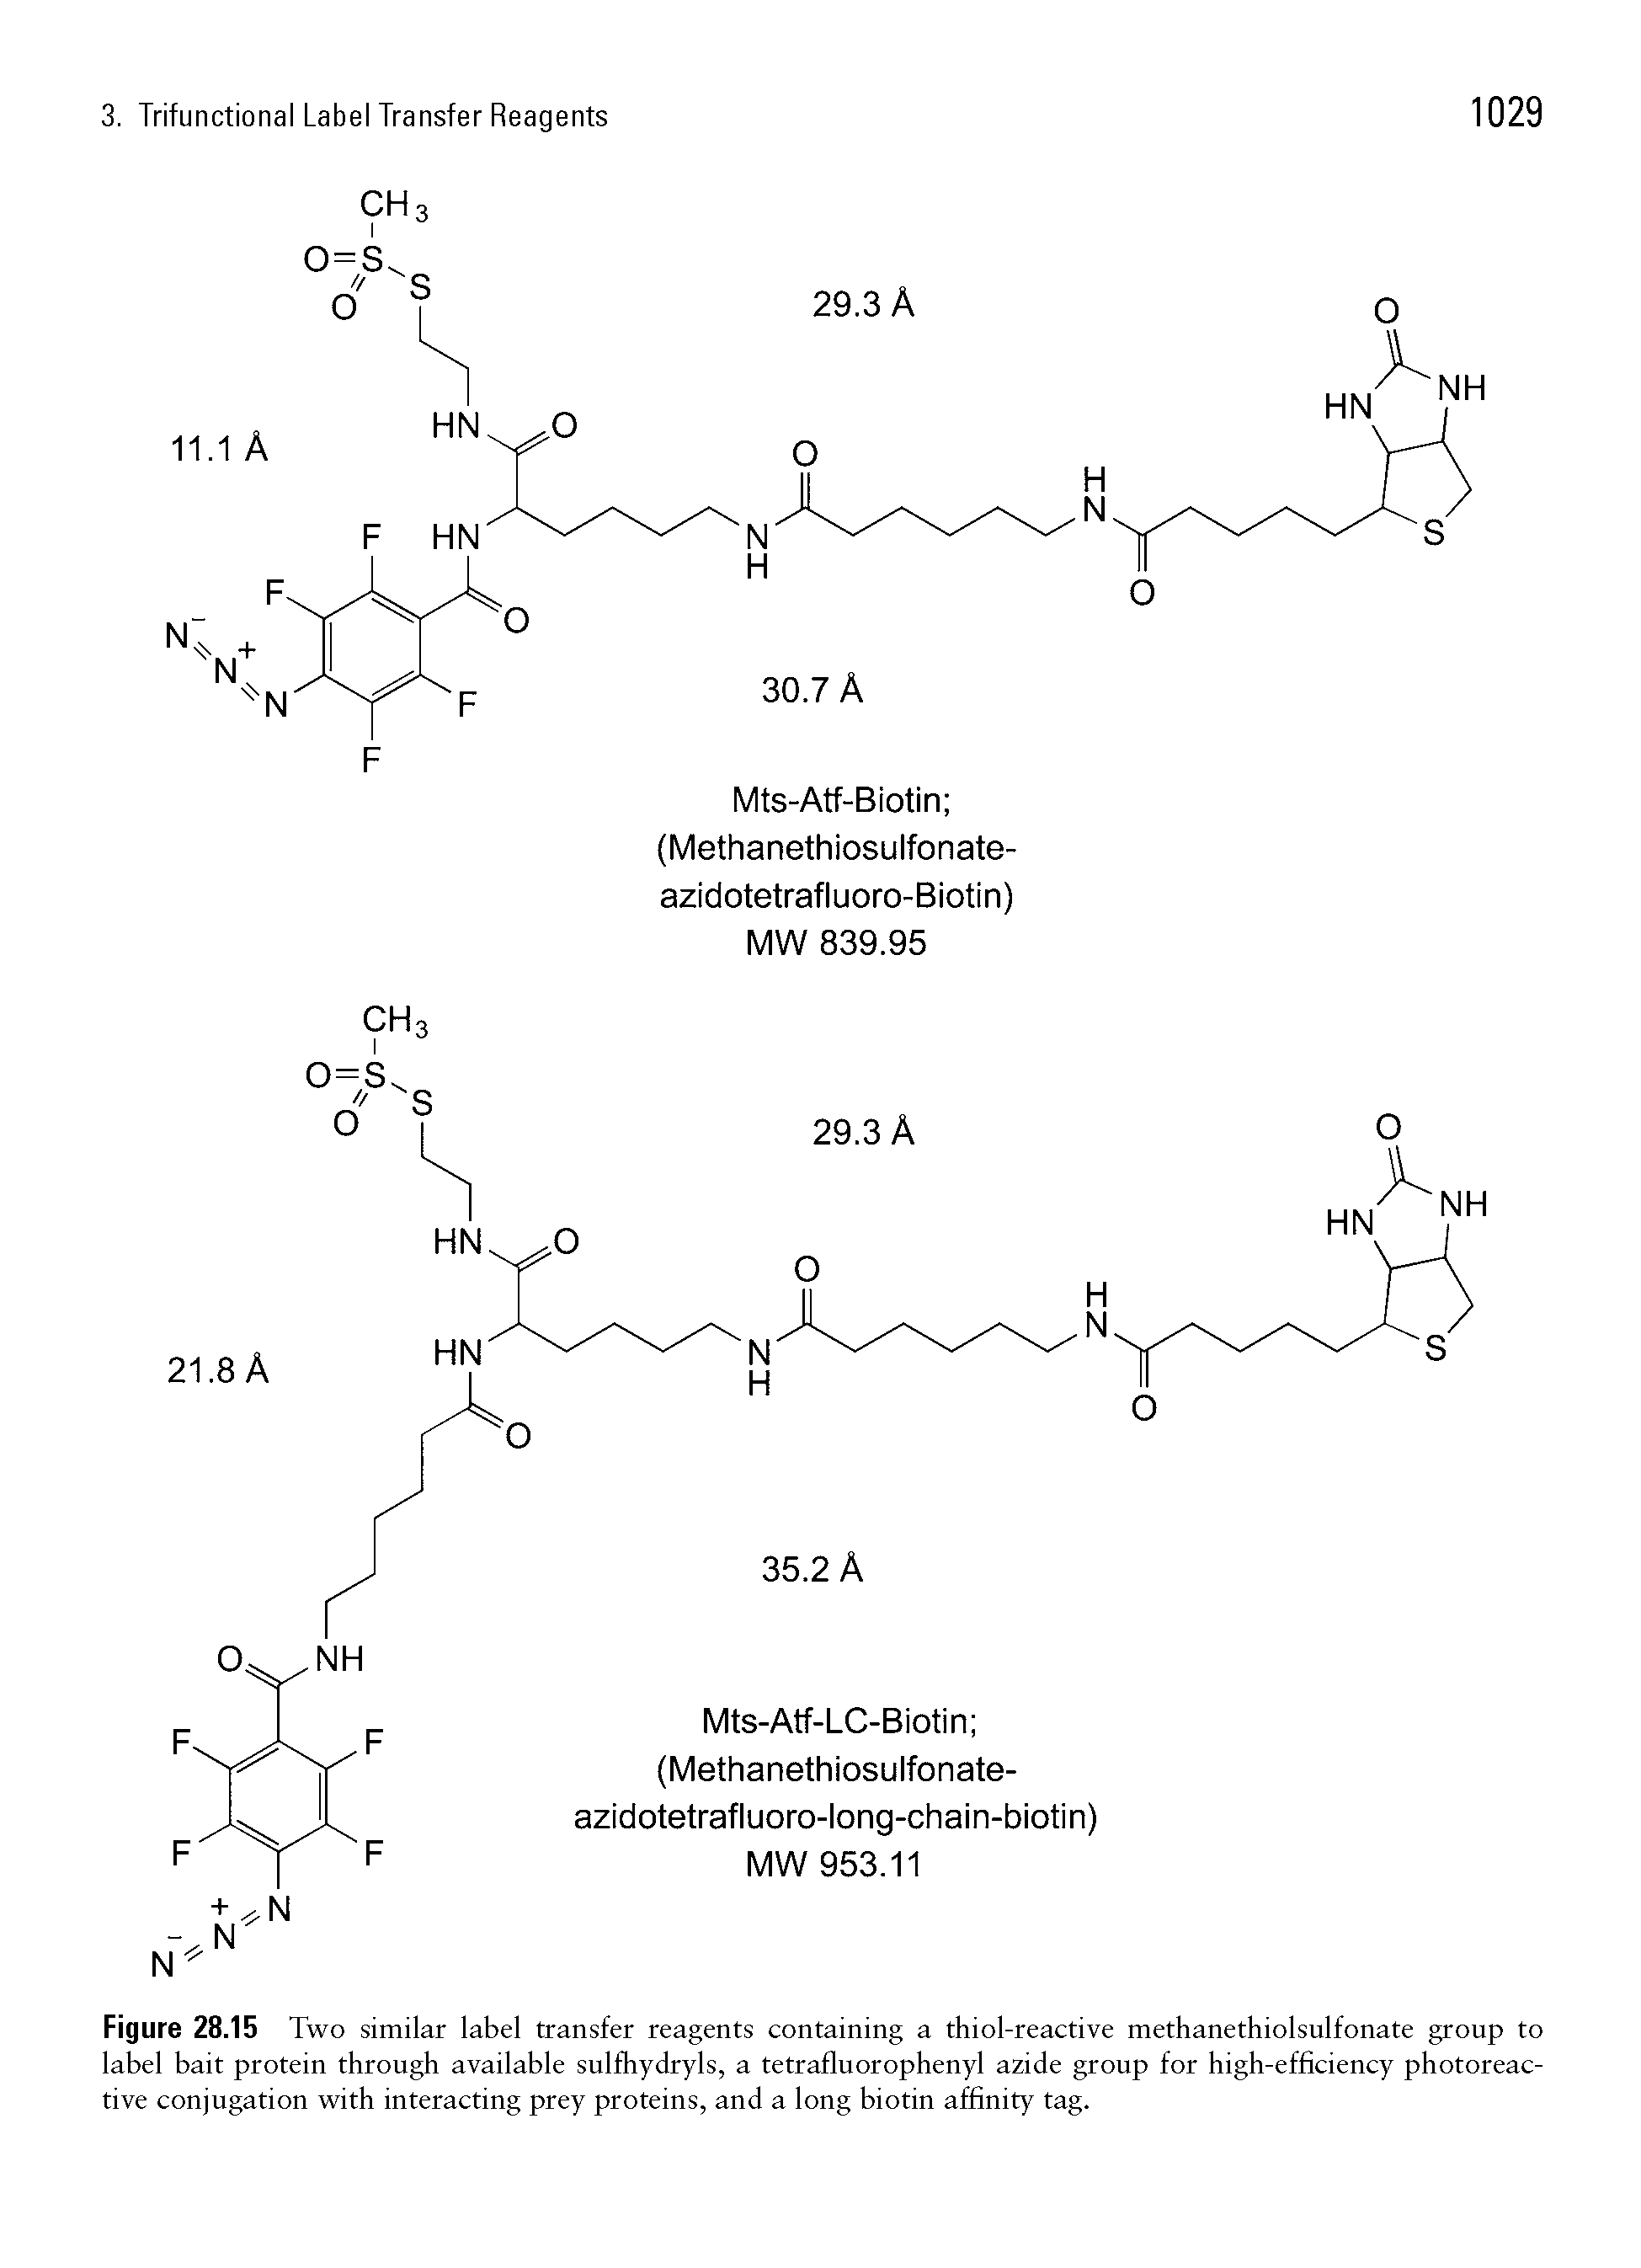 Figure 28.15 Two similar label transfer reagents containing a thiol-reactive methanethiolsulfonate group to label bait protein through available sulfhydryls, a tetrafluorophenyl azide group for high-efficiency photoreac-tive conjugation with interacting prey proteins, and a long biotin affinity tag.